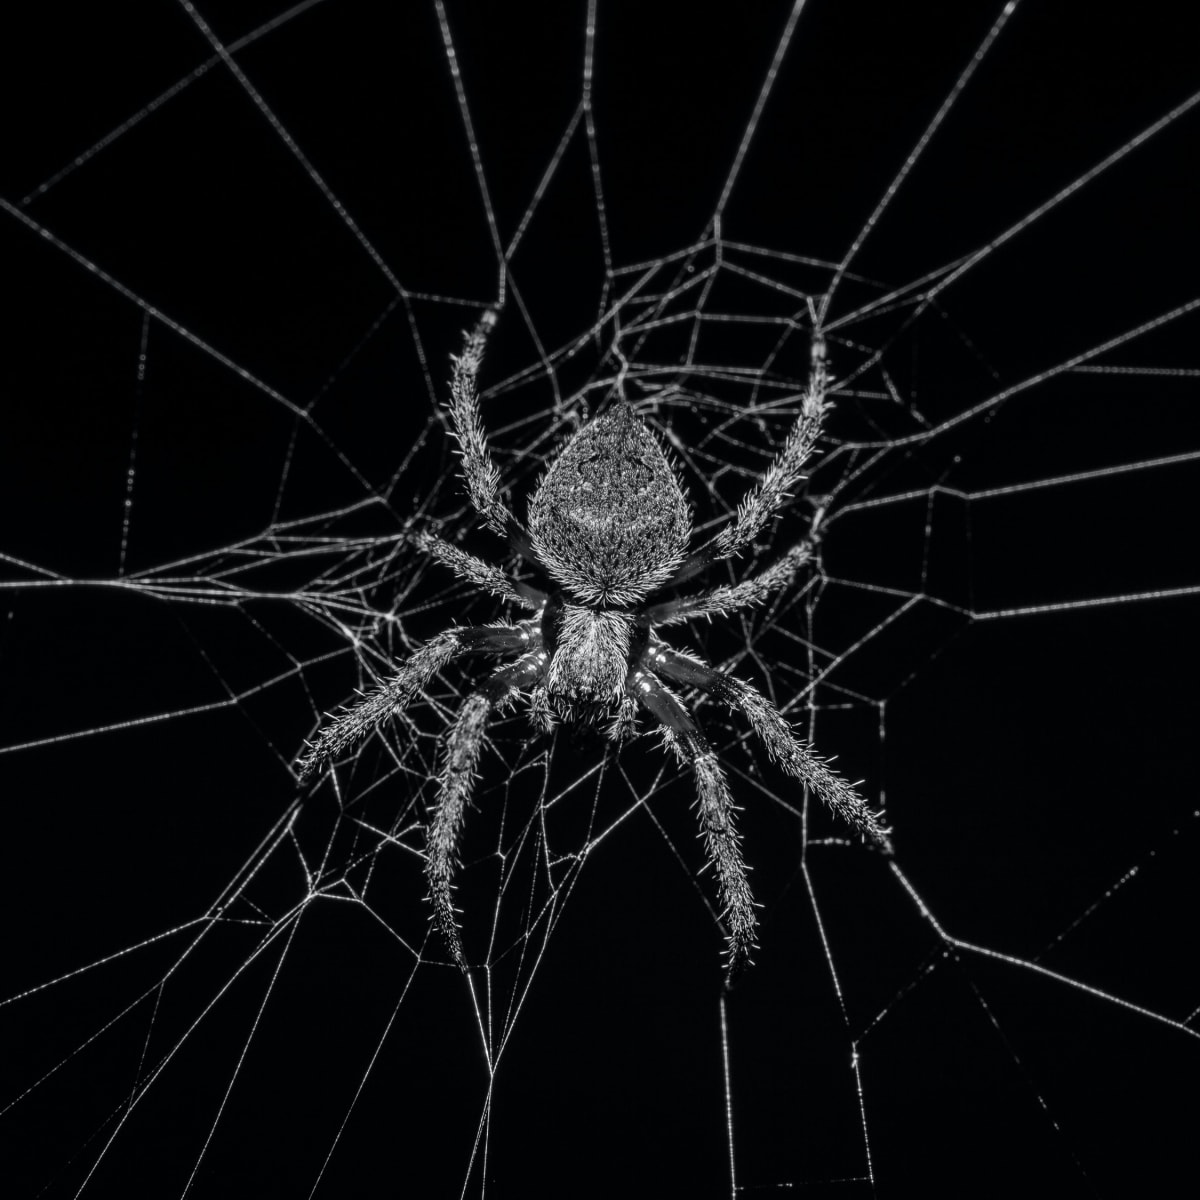 SpiderHarp: Oregon scientists study spiders with a web-inspired musical  instrument - OPB